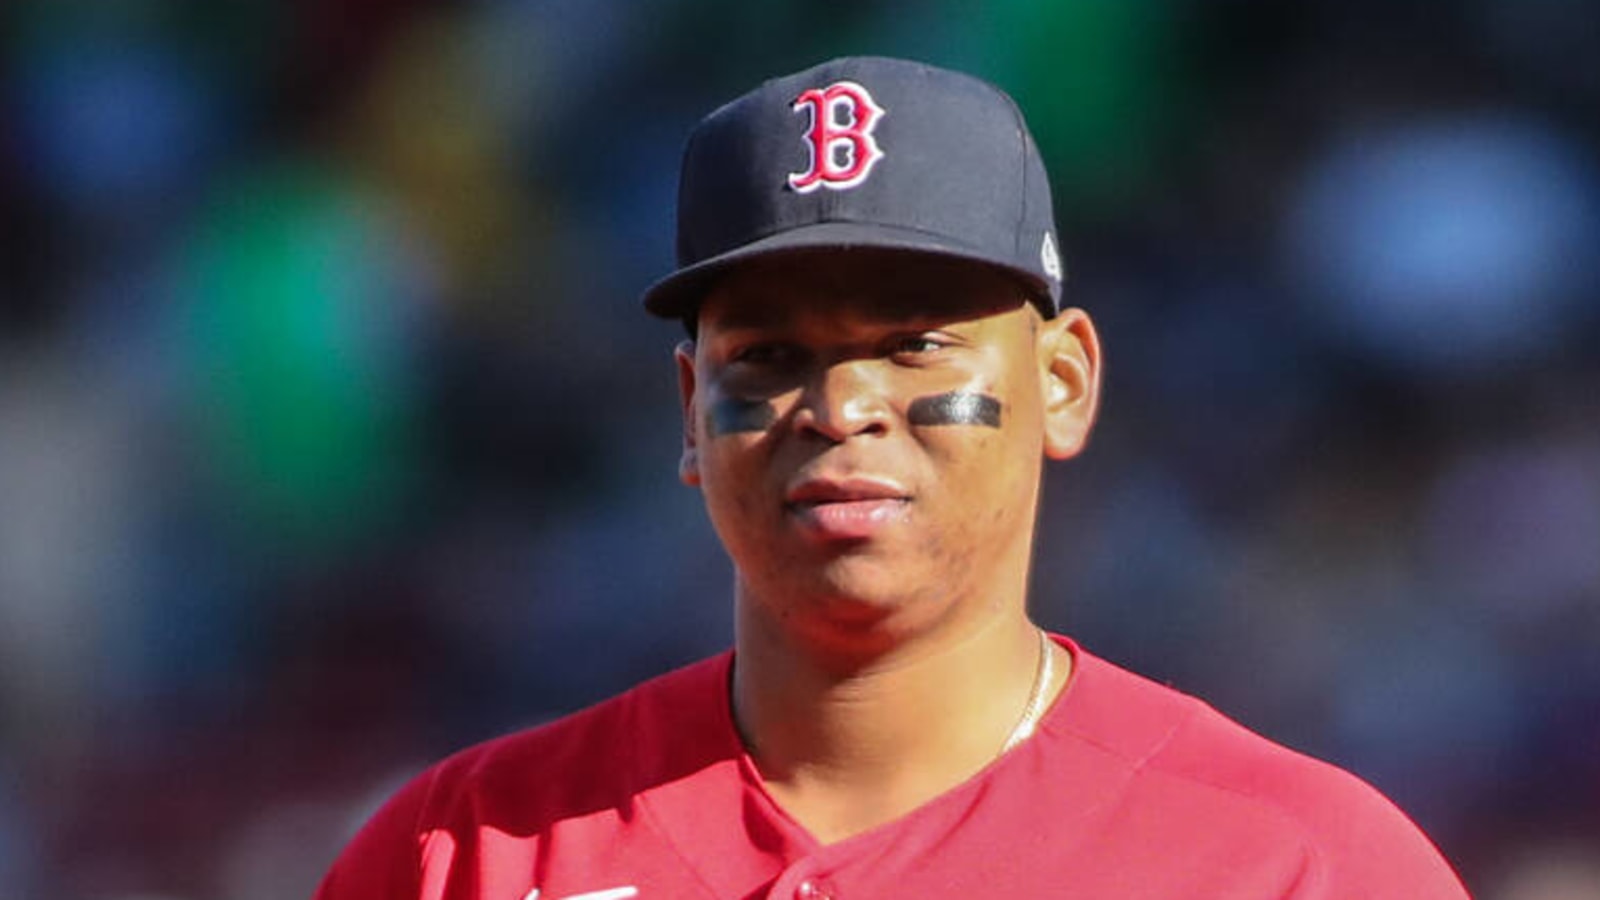 Does the Turner signing signal the end of Devers in Boston?